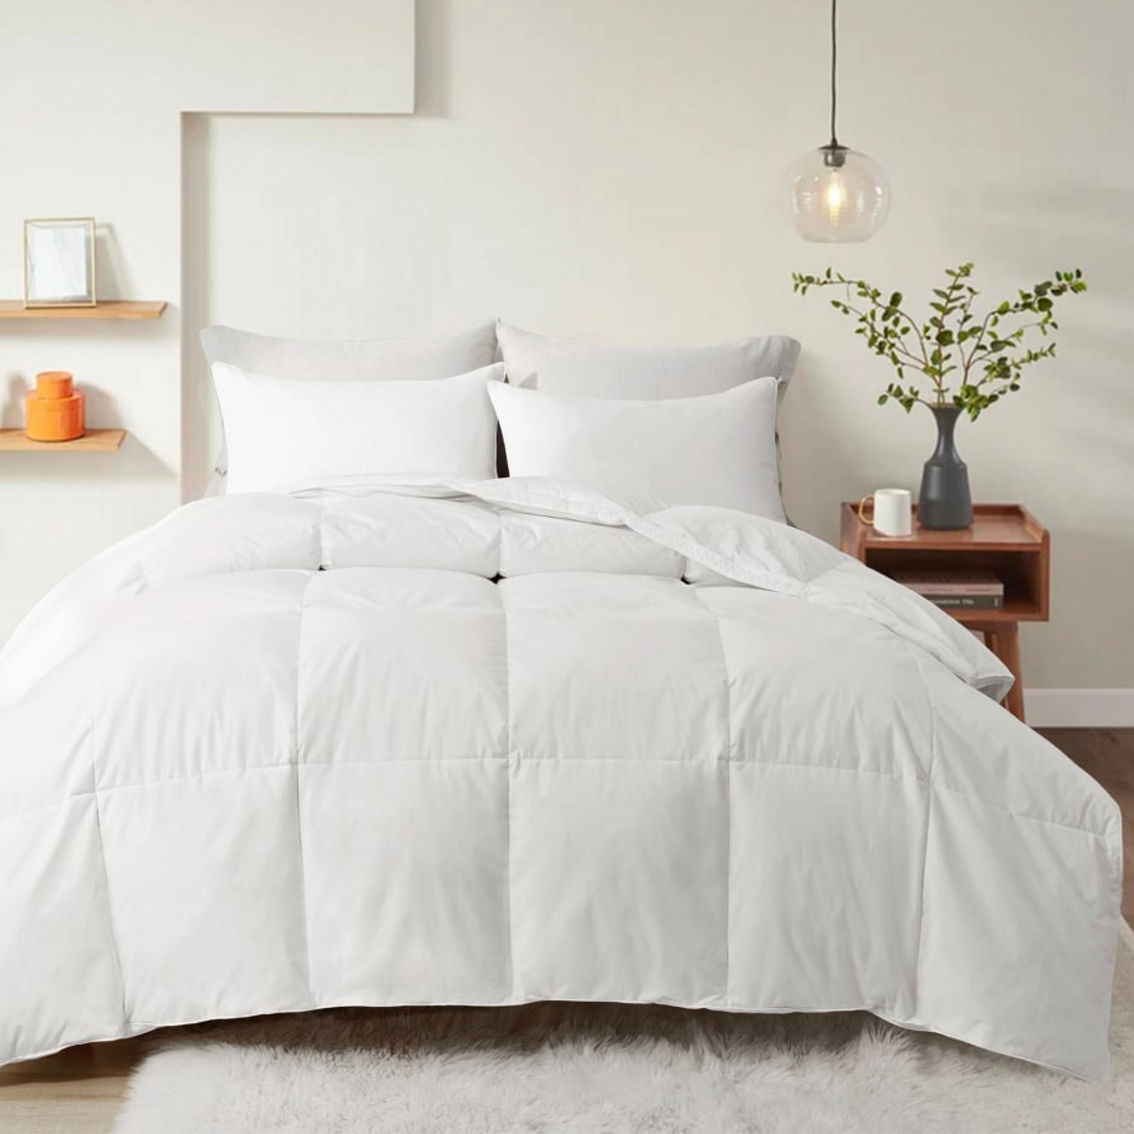 Heavy Weight White Goose Feather Fiber Comforter with Ultra Soft Microfiber Fabric - Image 2 of 5